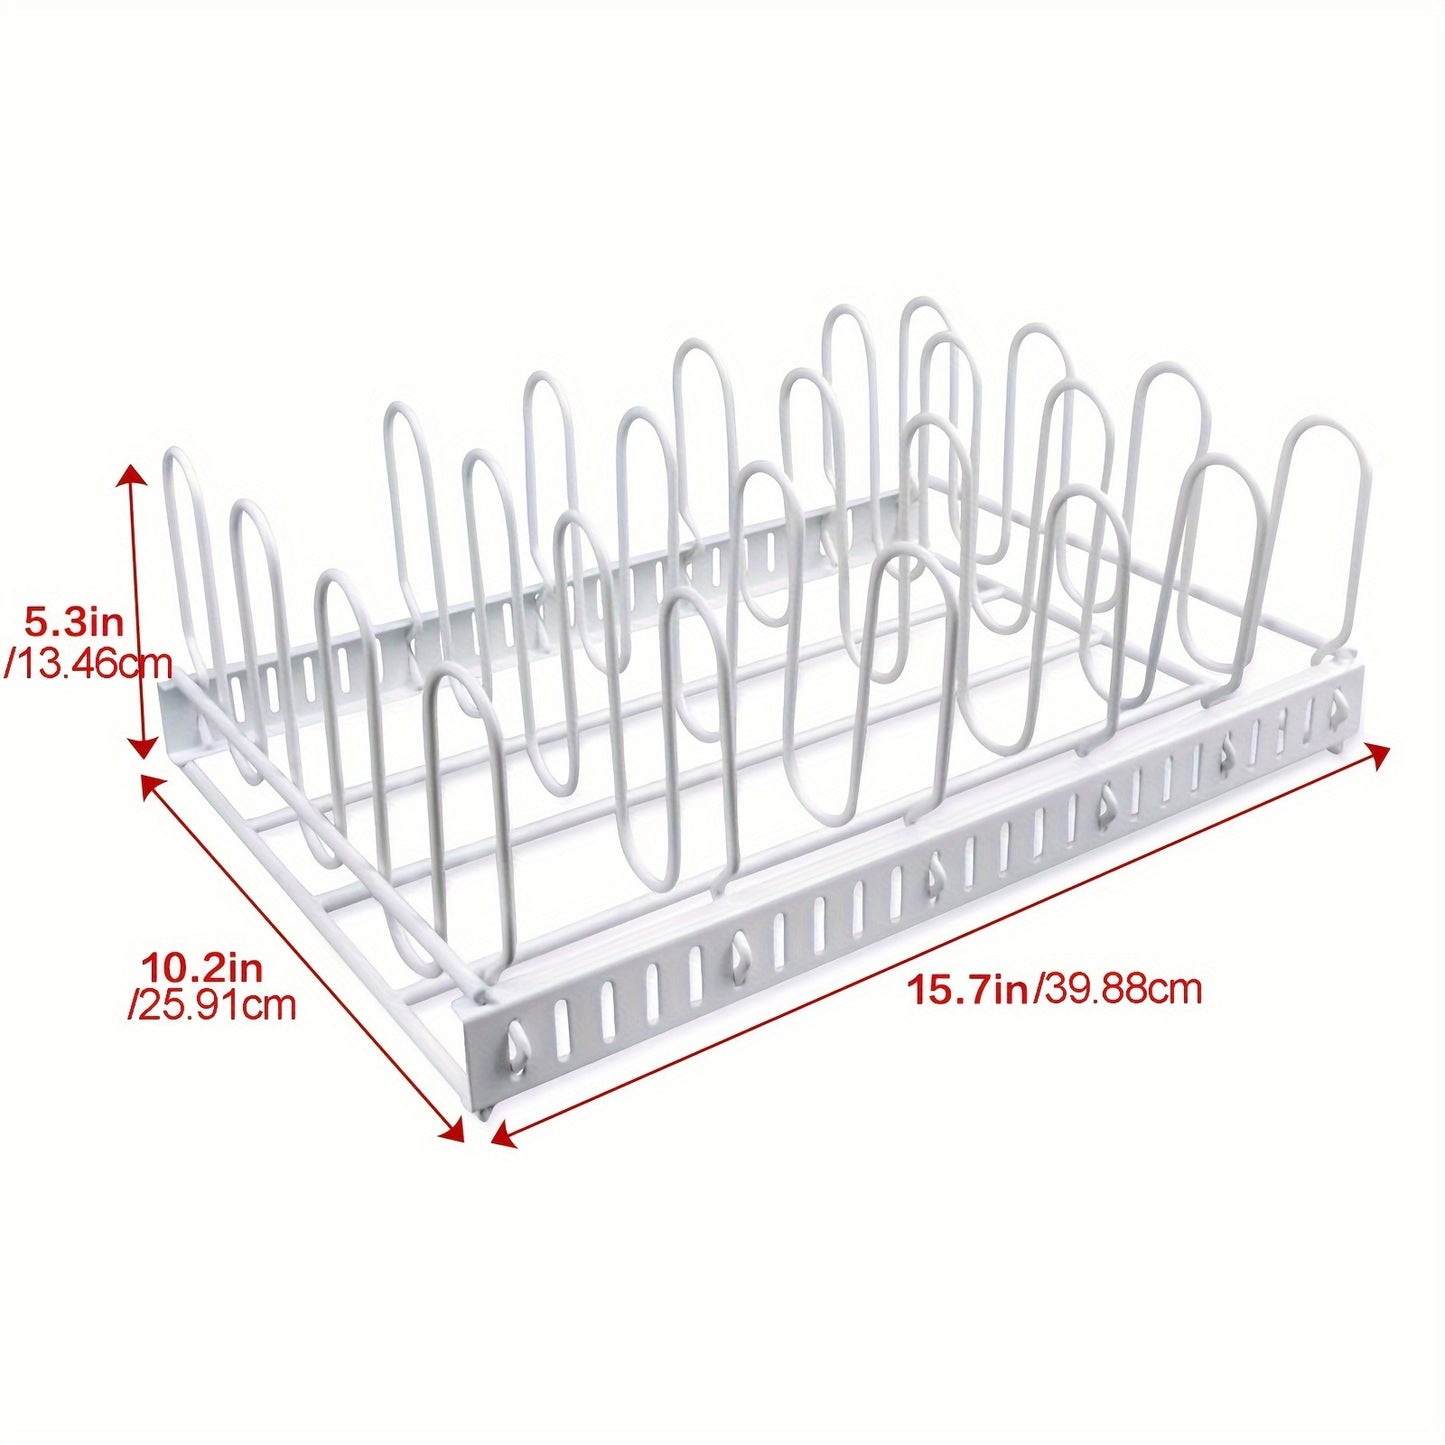 1PC Food Container Lid Organizer with 6 Adjustable Dividers, Metal Lid Holder Storage Rack, Container Lid organizer for Cabinets, Cupboards, Pantry, Drawers